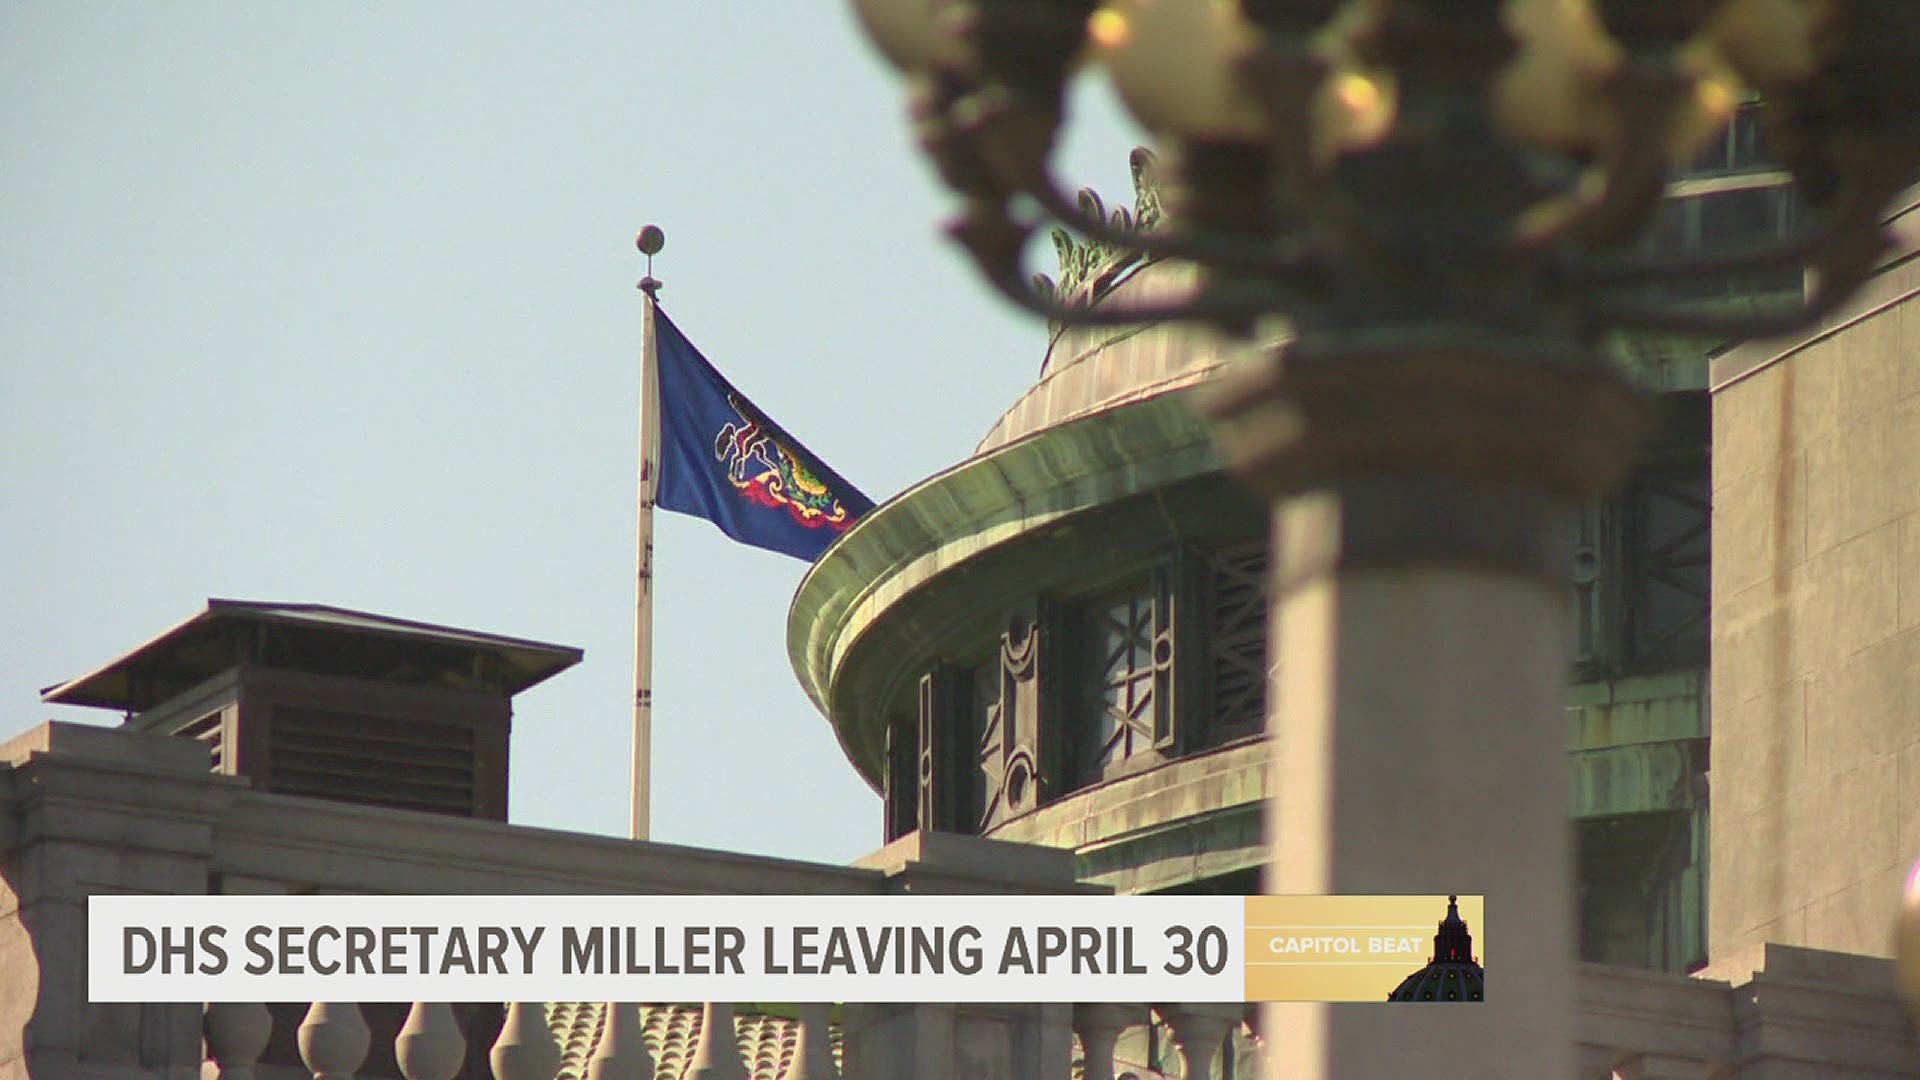 As Teresa Miller gets set to leave at the end of April, Senators Judy Ward and John Yudichak are calling on the Auditor General to review her department's policies.